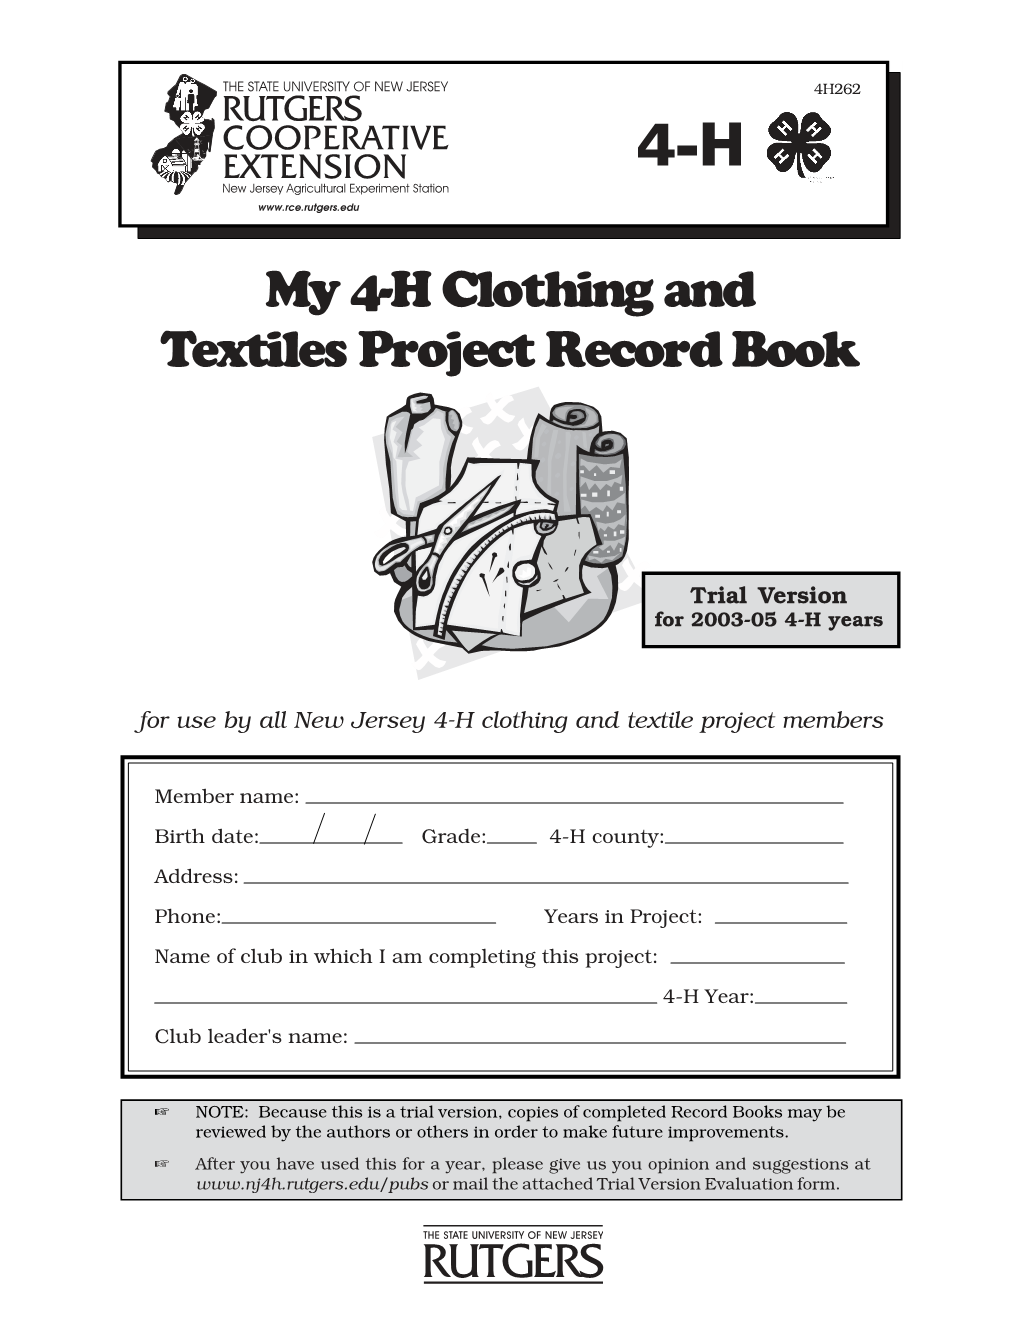 My 4-H Clothing and Textiles Project Record Book